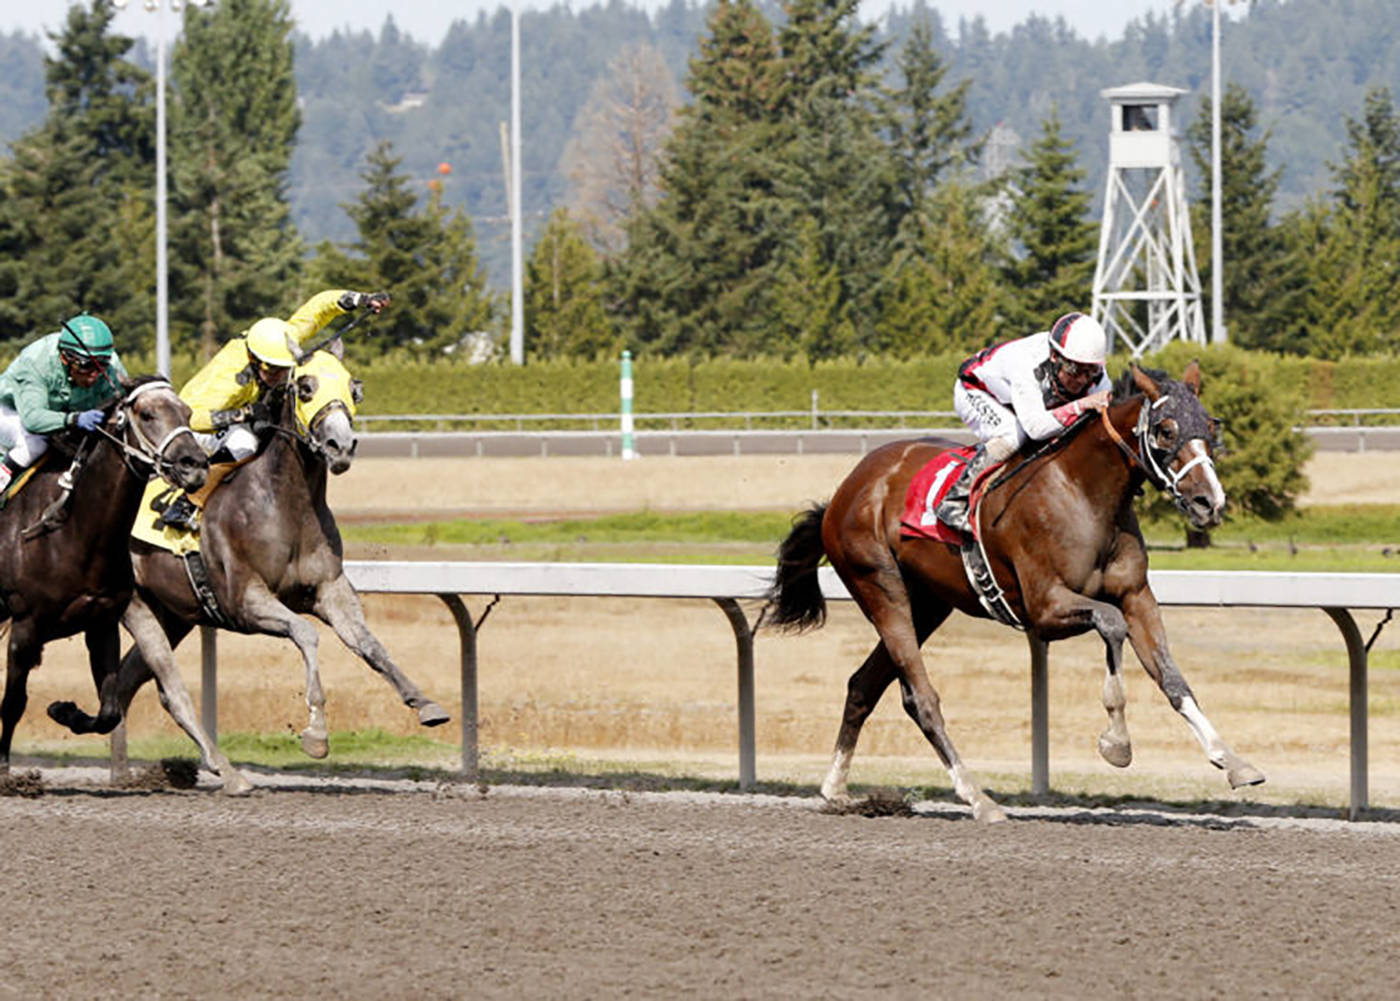 My Heart Awakens, with Javier Matias up, romps to a two-length victory Sunday in the $18,000 Carl’s Jr. Purse for 2-year-olds on Italian Day at Emerald Downs.